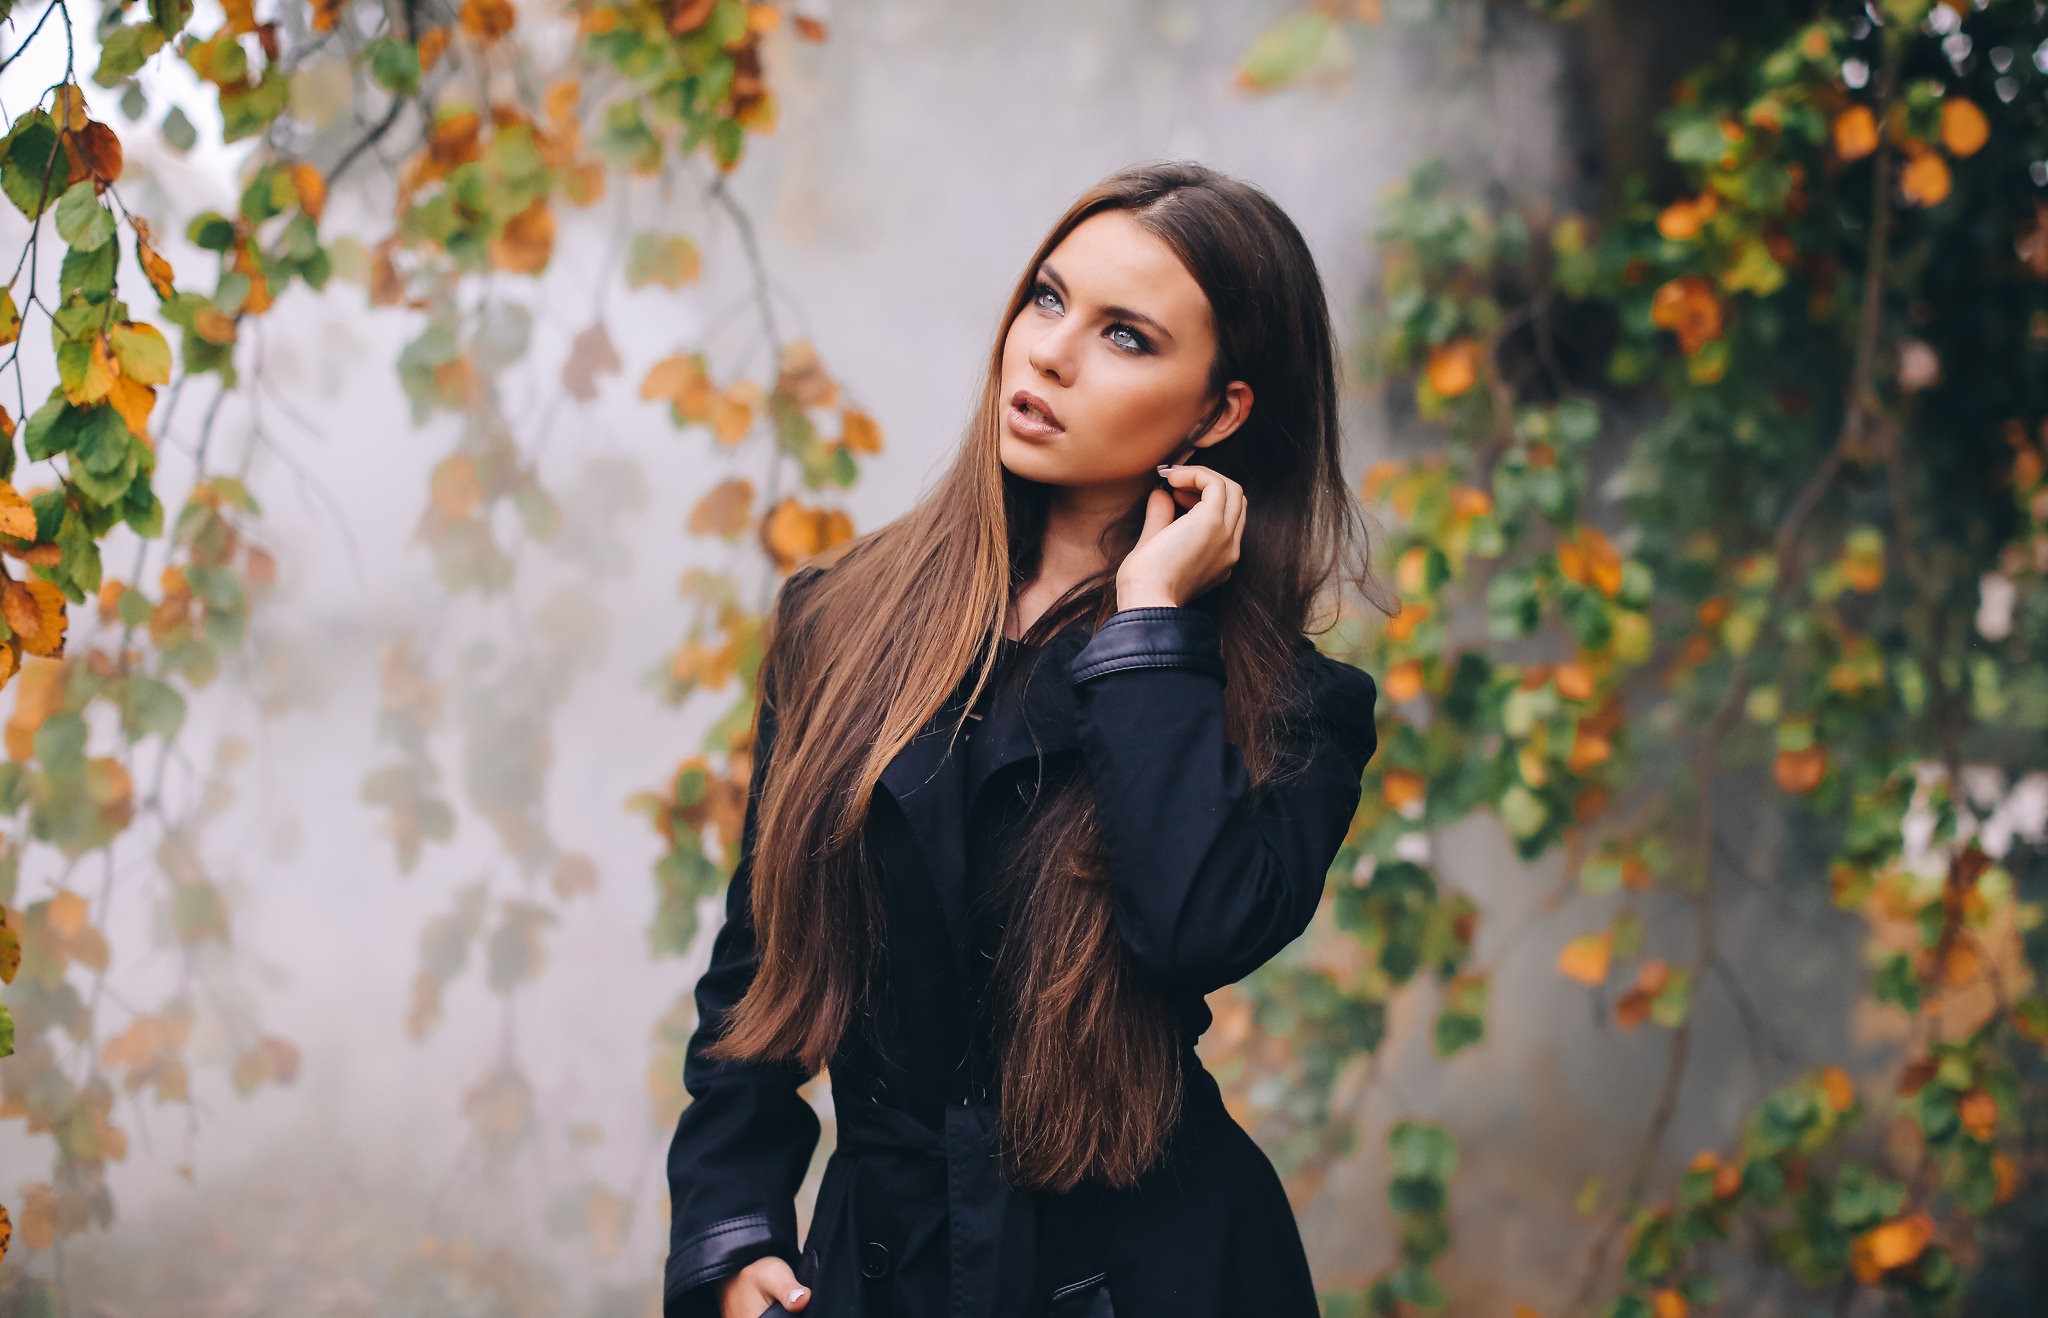 People 2048x1318 women open mouth looking away model brunette blue eyes long hair women outdoors David Olkarny black coat coats looking into the distance trench coat hands in pockets touching hair Tiziana Di Garbo looking up straight hair mist glamour outdoors classy